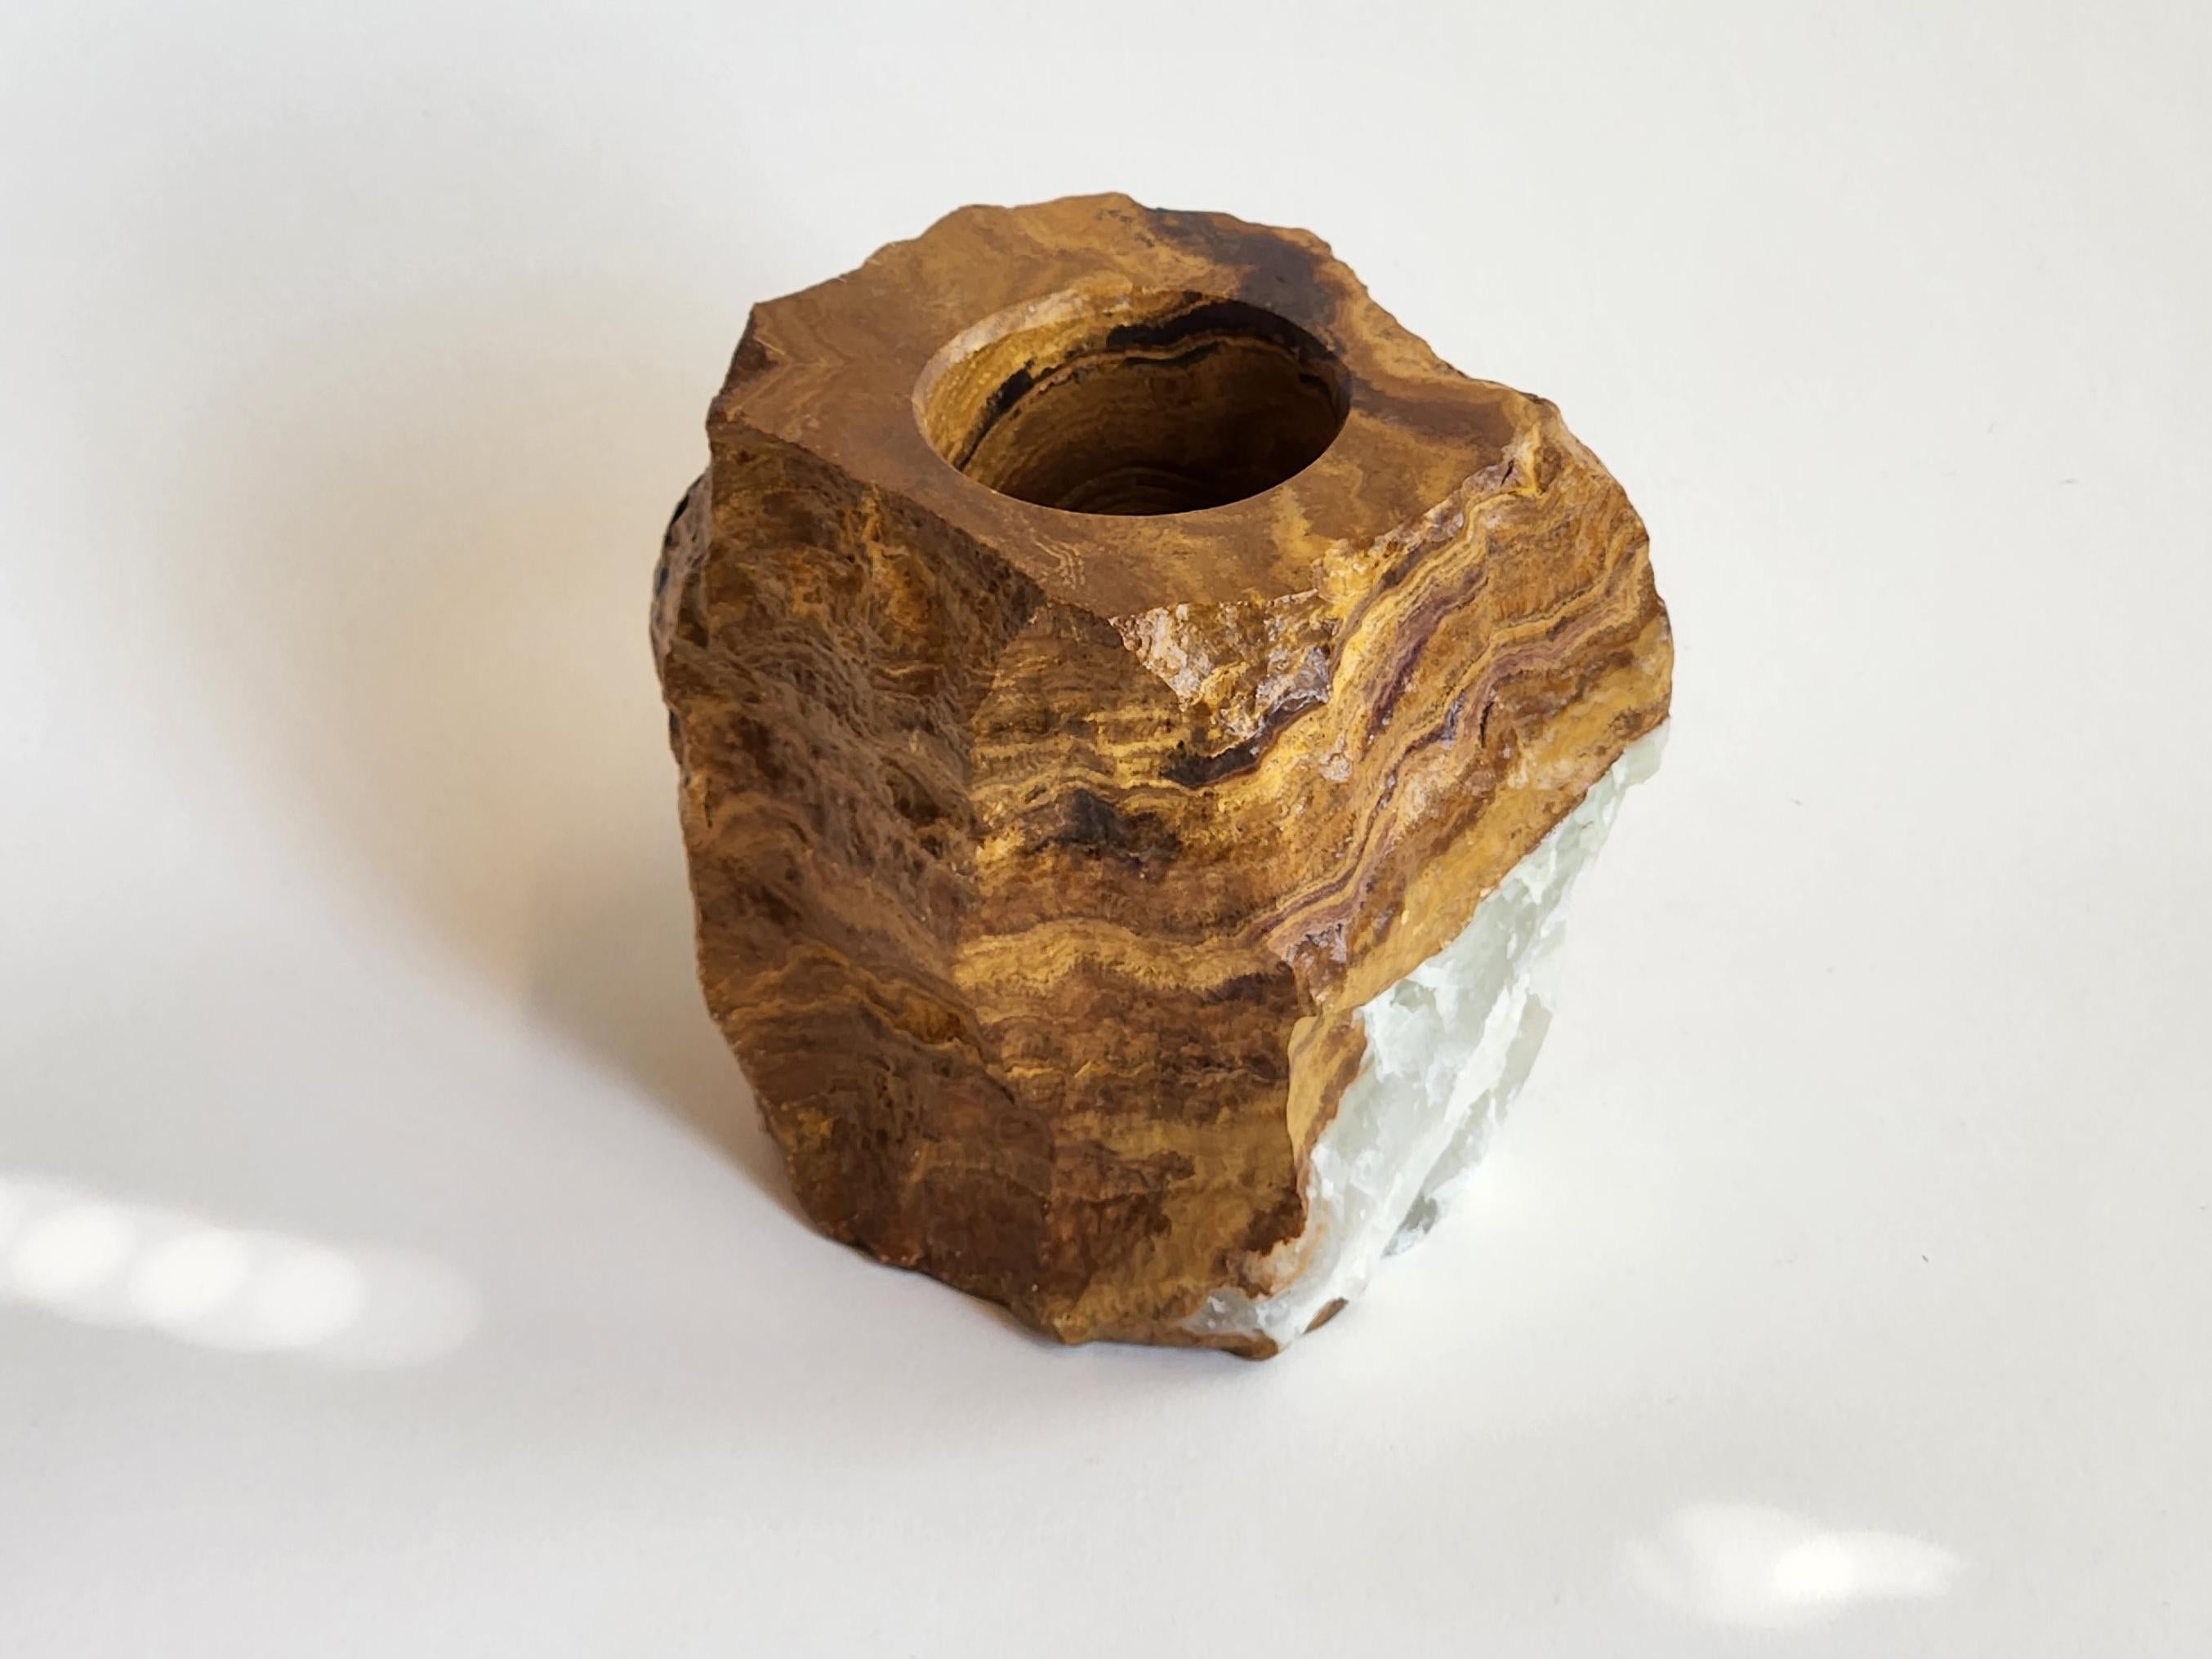 Modern Manually Carved Layered Onyx Candle Holder with Natural Colored Diagonal Stripes